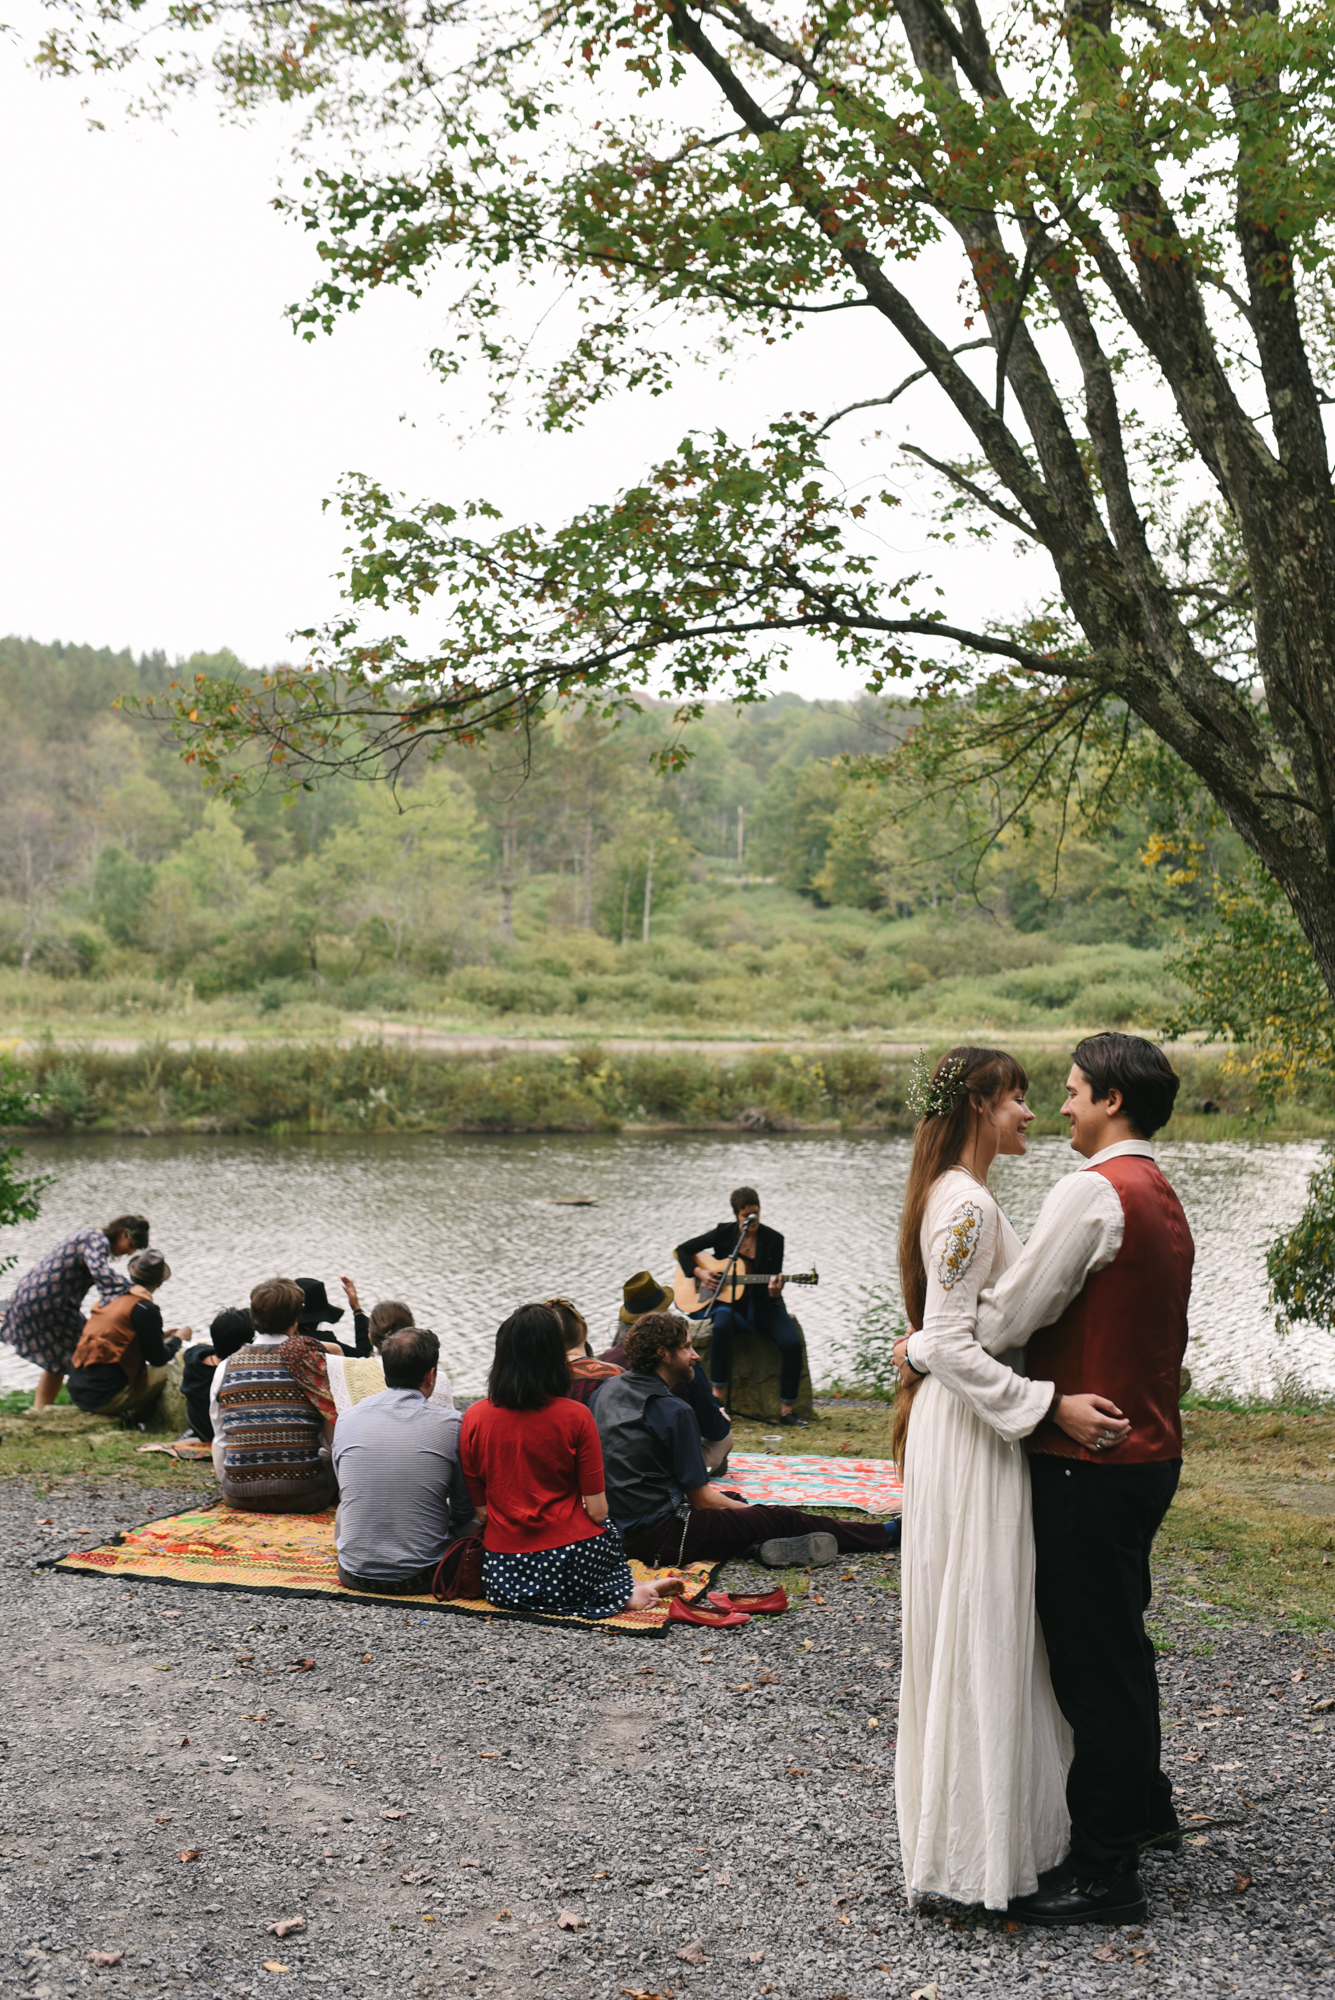  Mountain Wedding, Outdoors, Rustic, West Virginia, Maryland Wedding Photographer, DIY, Casual, bride and groom hugging and laughing with friend plays guitar 